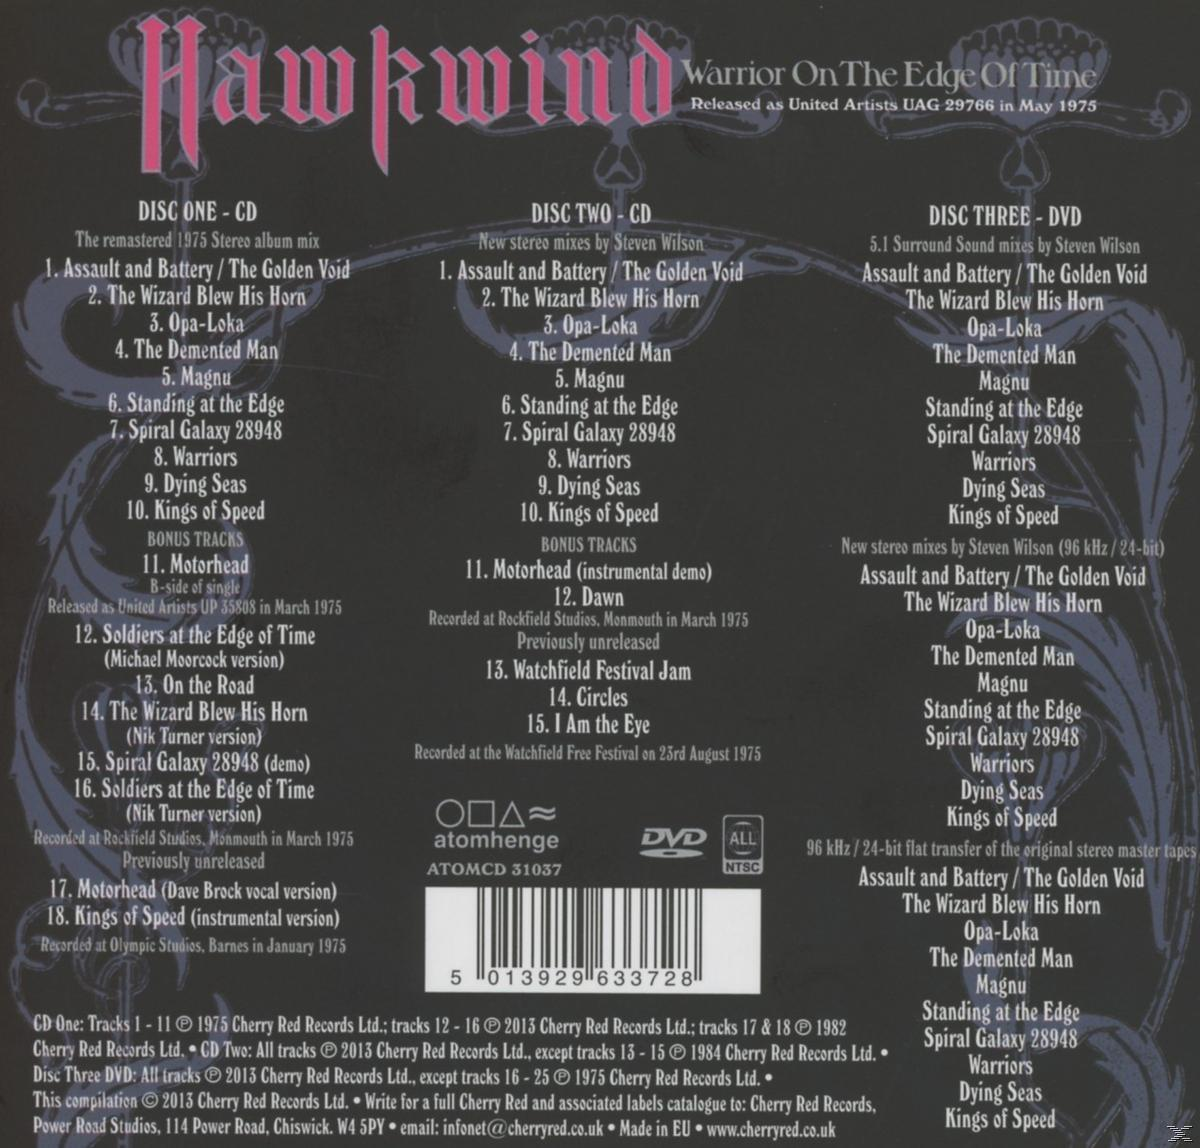 Hawkwind - Warrior On The (Deluxe Edition) Video) - DVD Of (CD + Edge Time